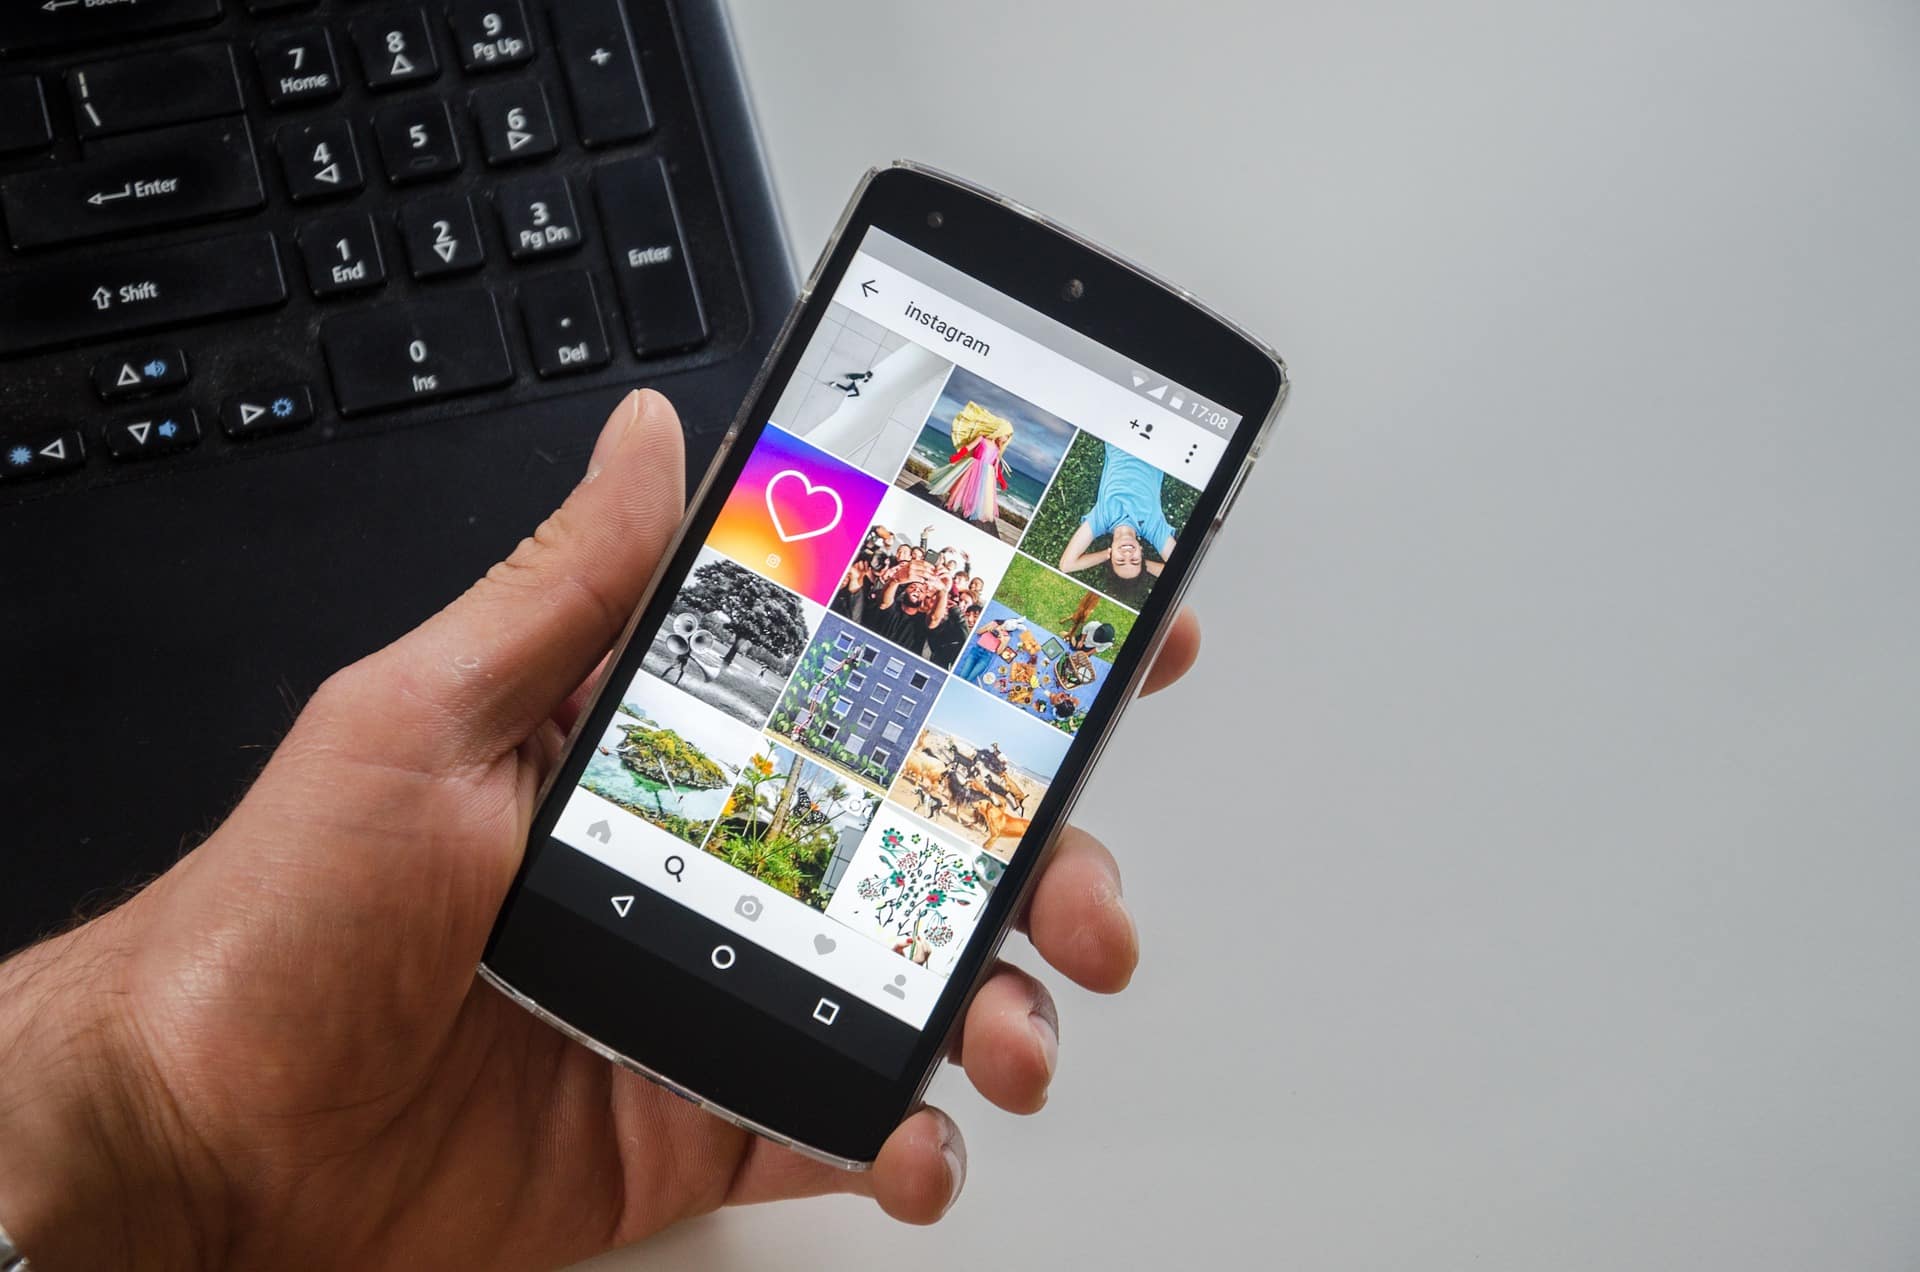 View of a smartphone in the hand - it shows an Instagram feed